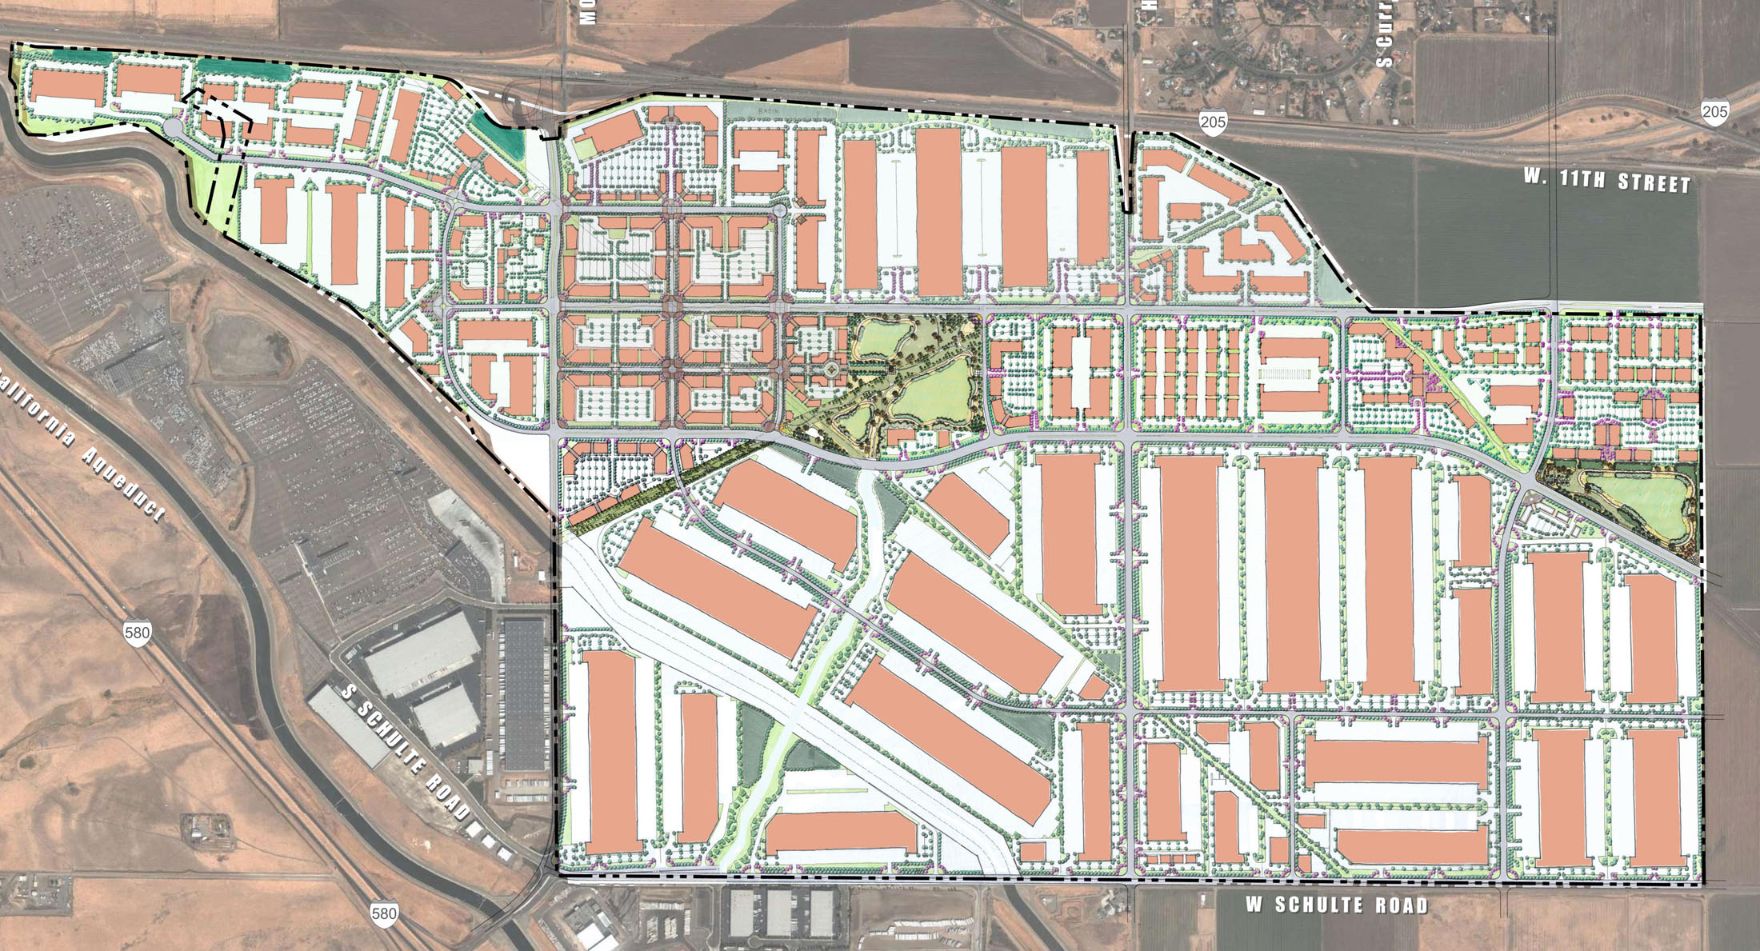 Main site plan of the International Park of Commerce in Tracy California